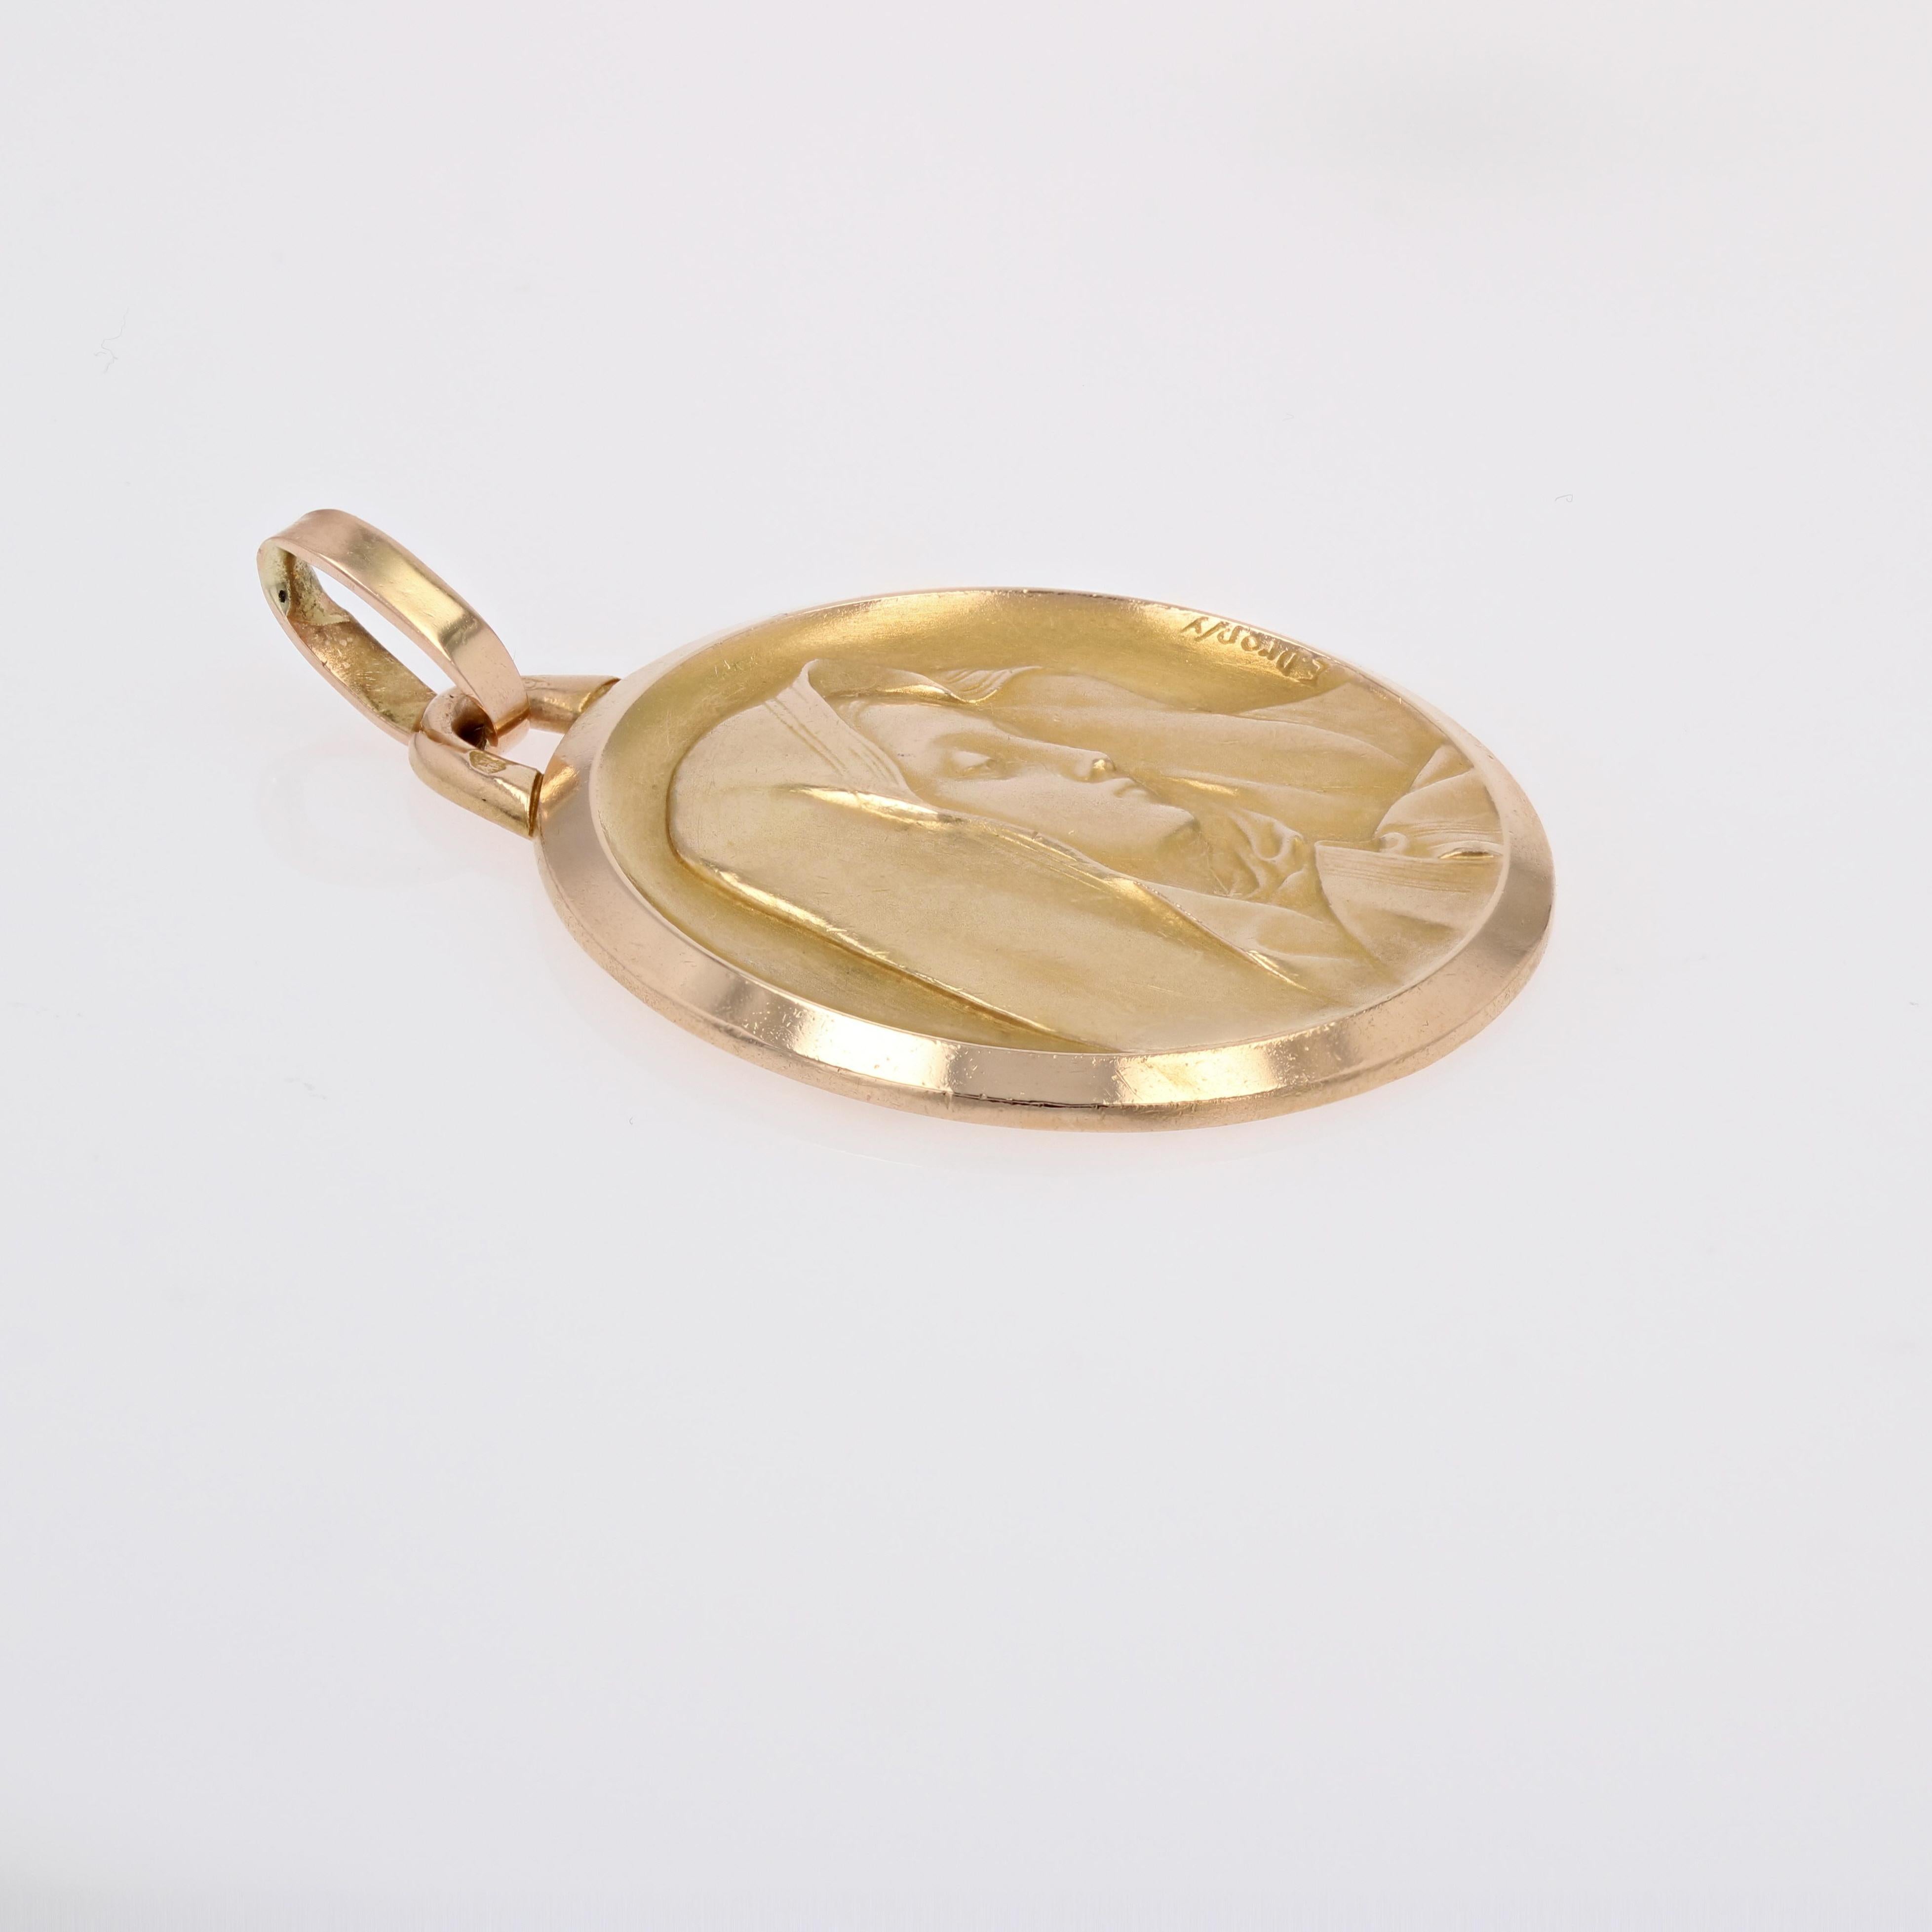 Medal in 18 karat yellow gold, eagle head hallmark.
Massive, this antique round shape medal, represents the Virgin Mary. The back of this antique jewel is engraved with initials and the date 